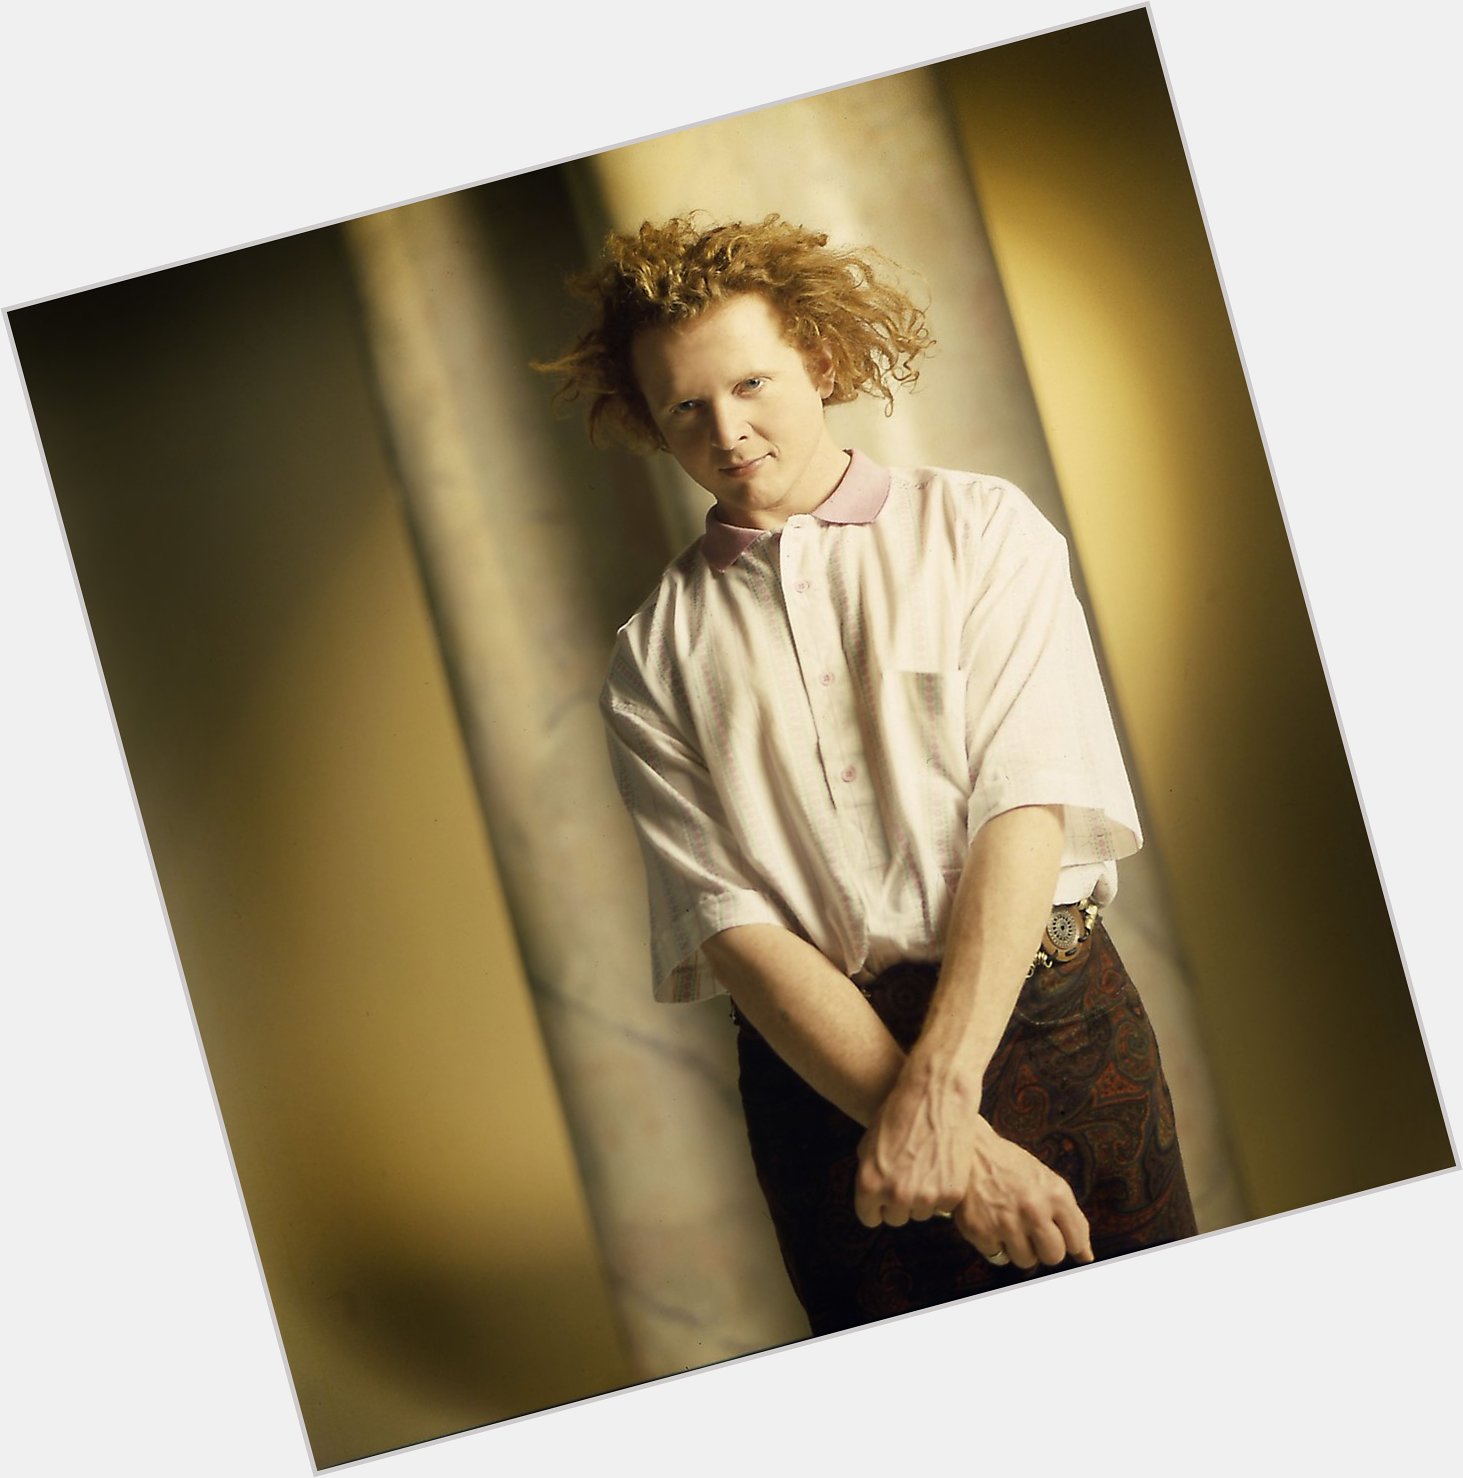 Wishing frontman Mick Hucknall a happy 59th birthday. Favourite Simply Red song? 